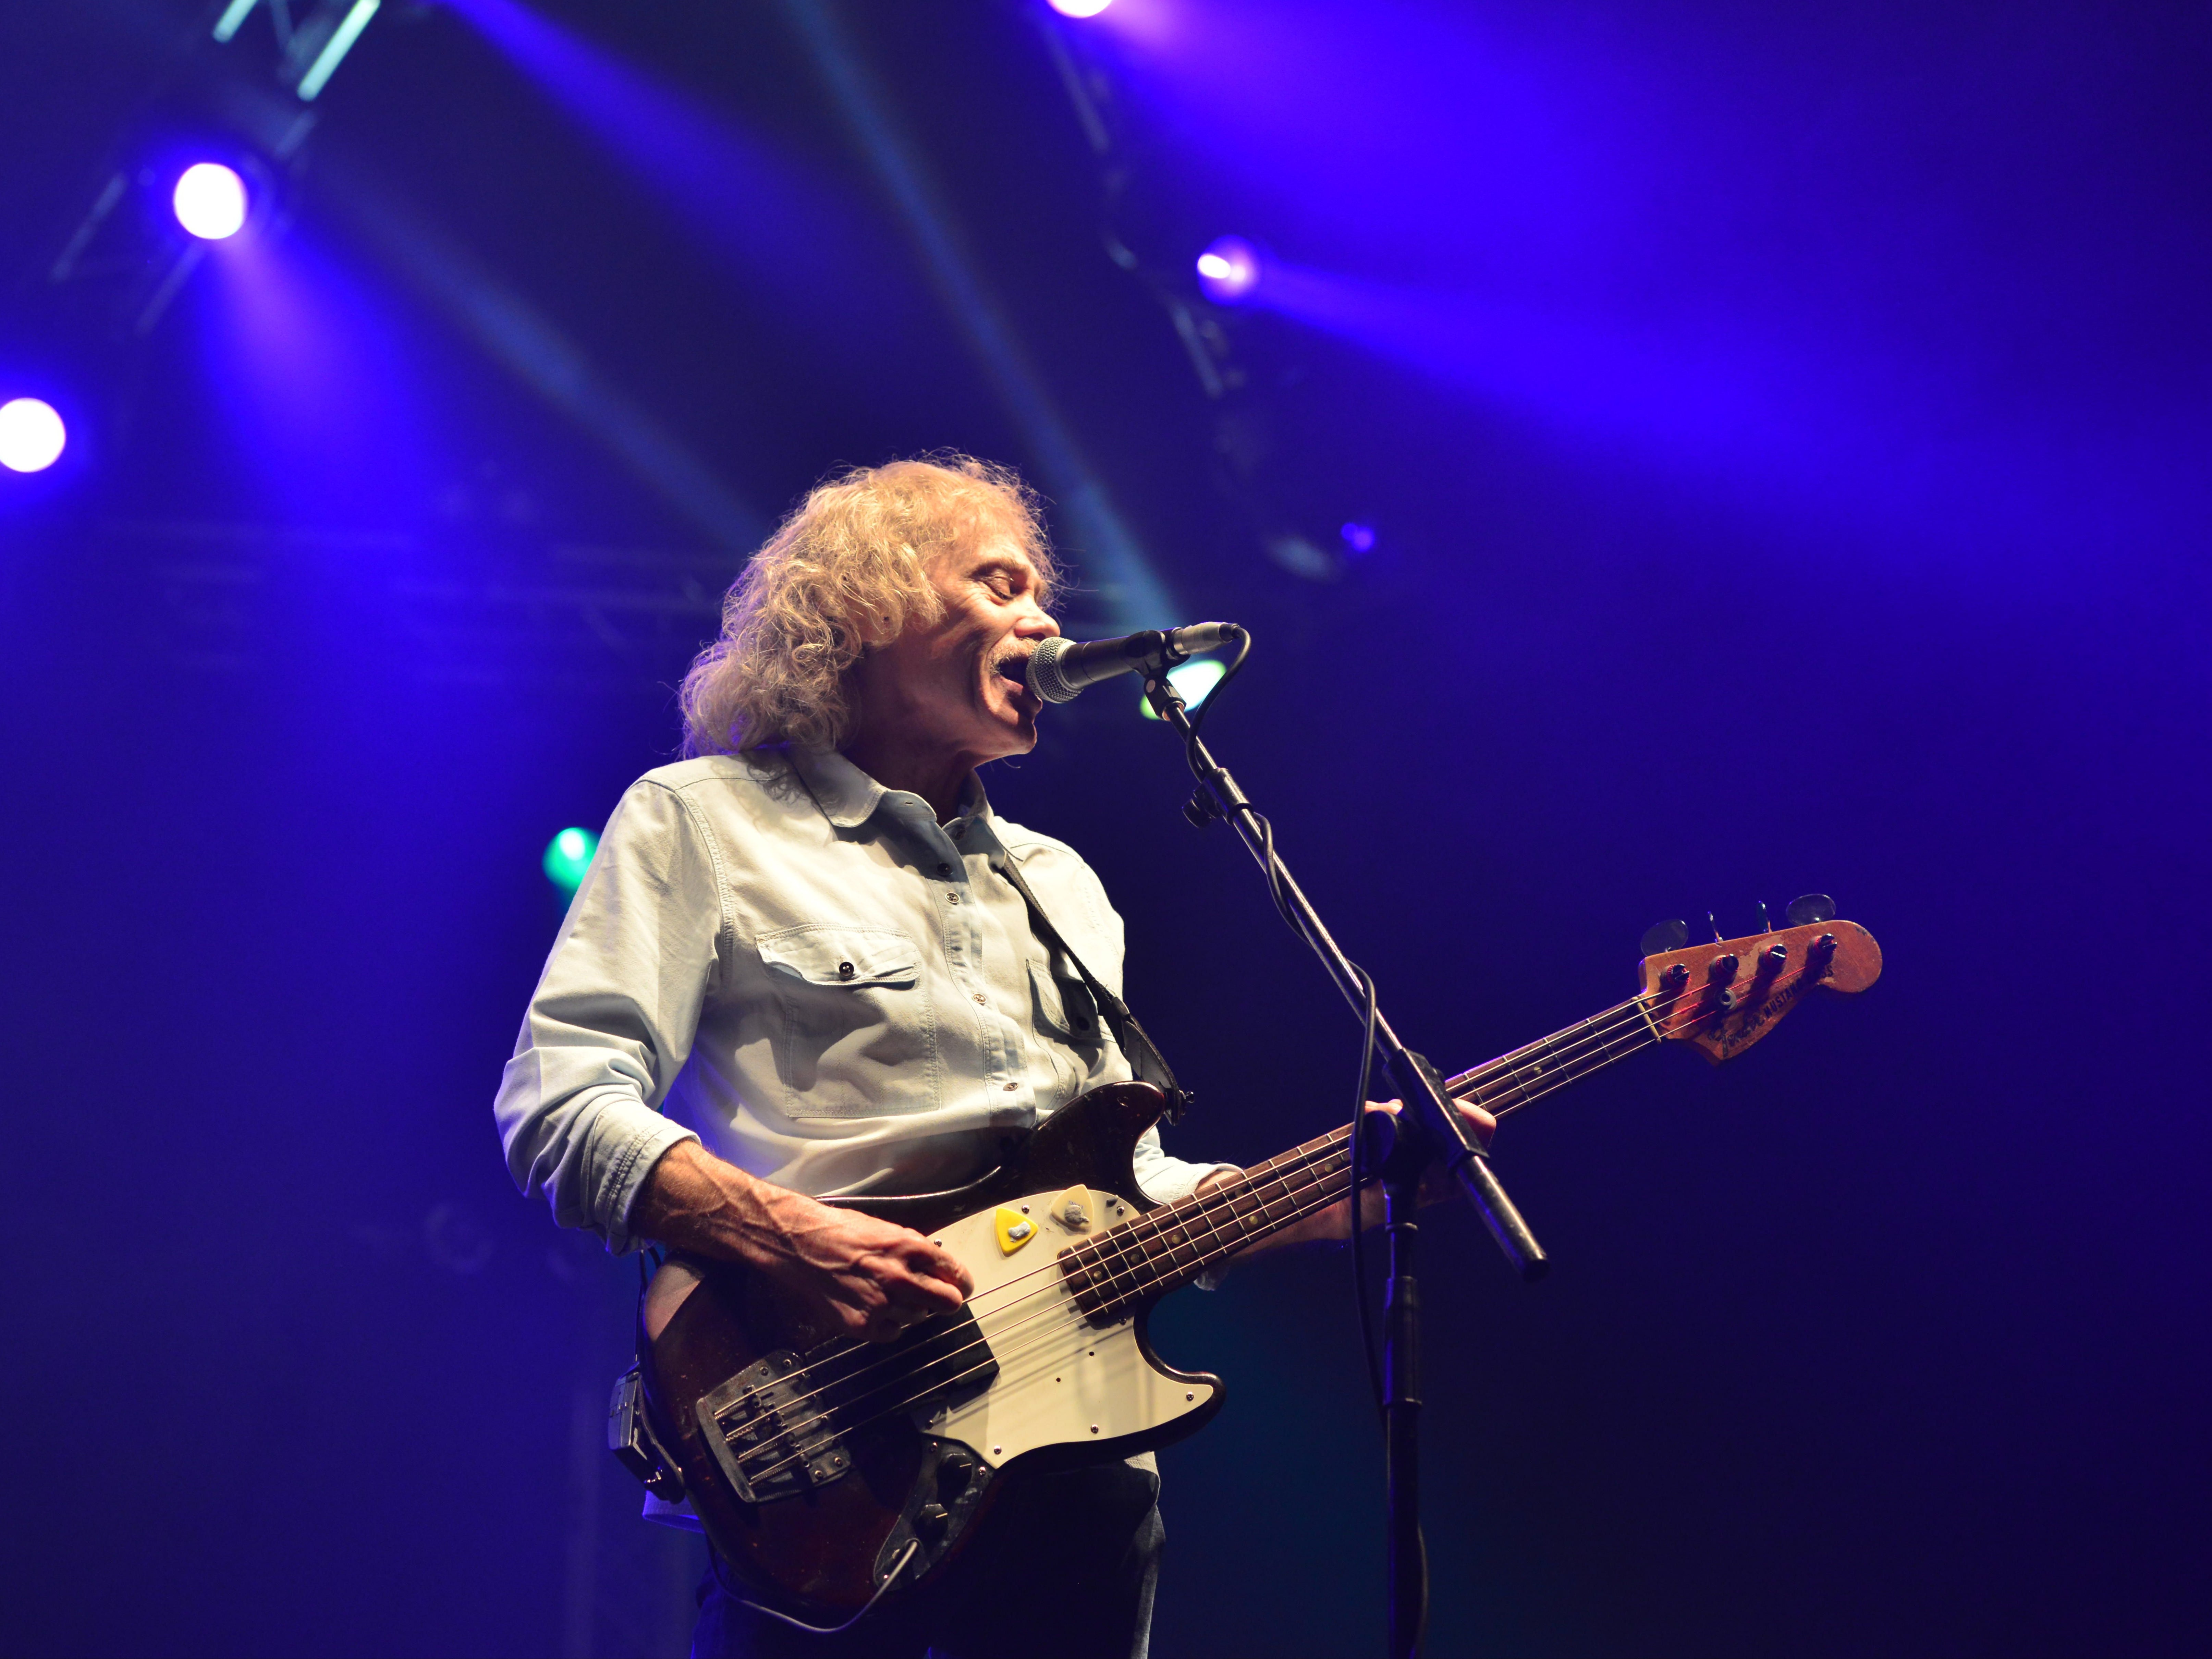 Lancaster performing live at Wembley Arena, London, in March 2013